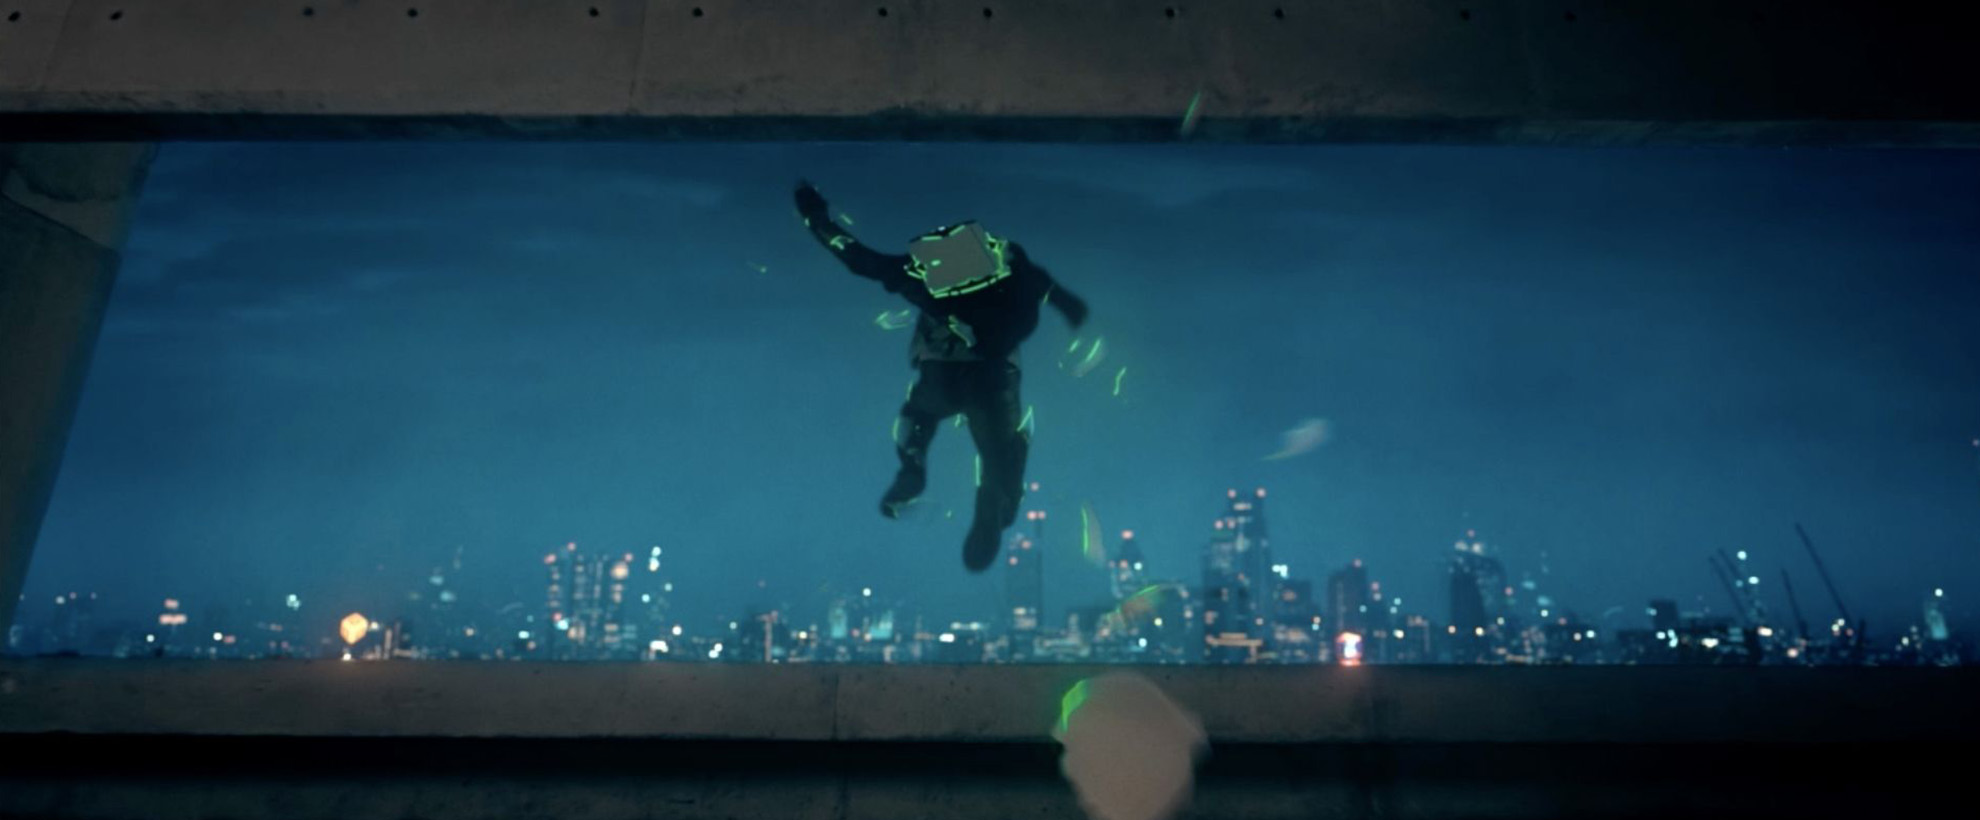 A person jumps off a building with a glowing green backpack on with a city skyline in the background